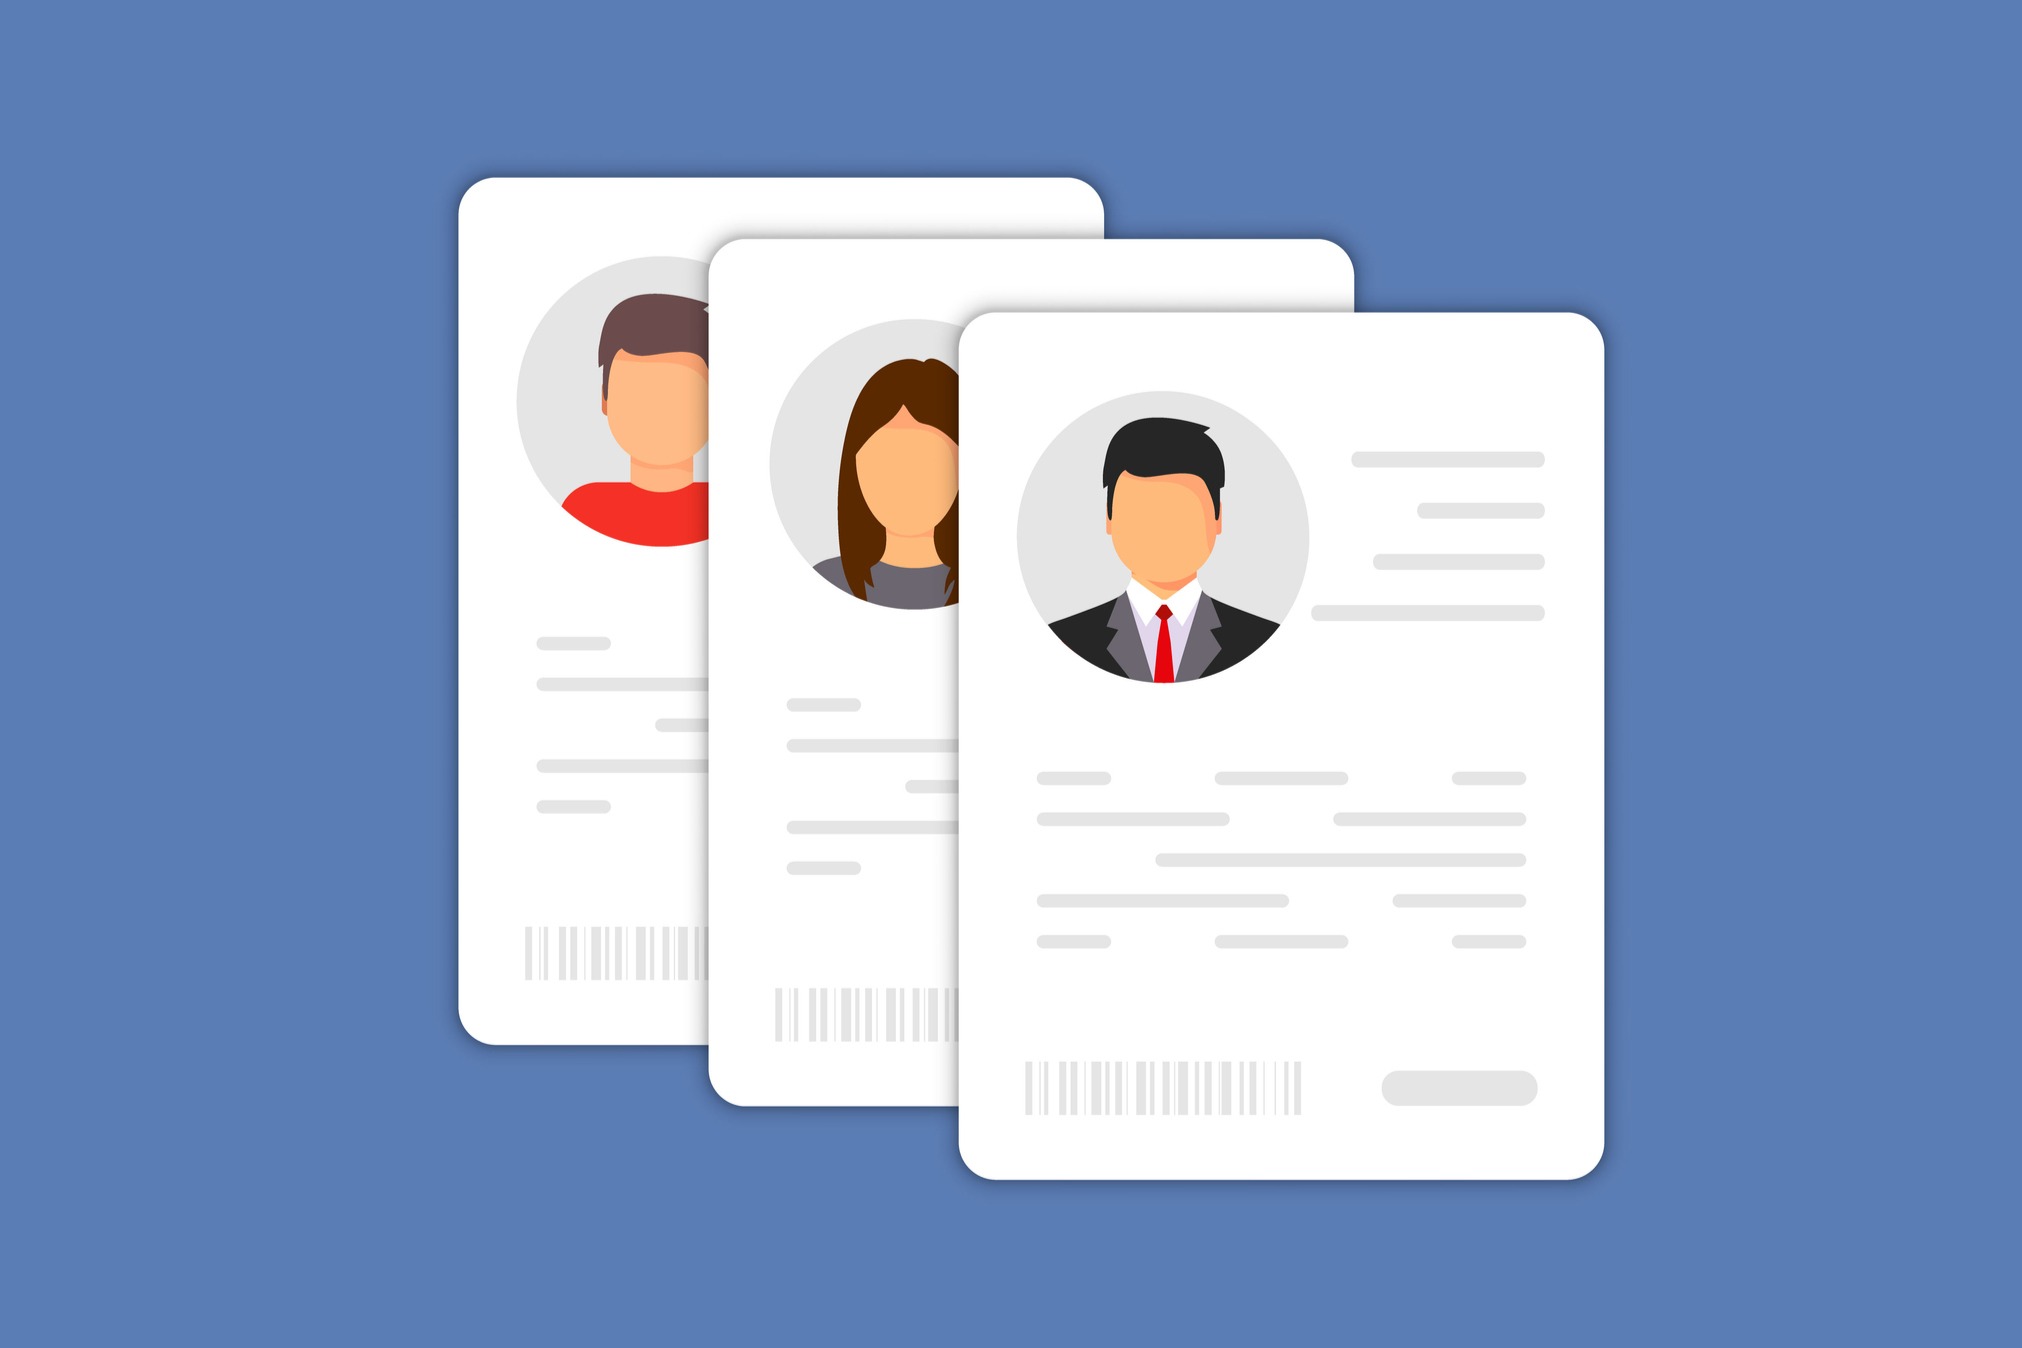 three icons for people's profiles or resume